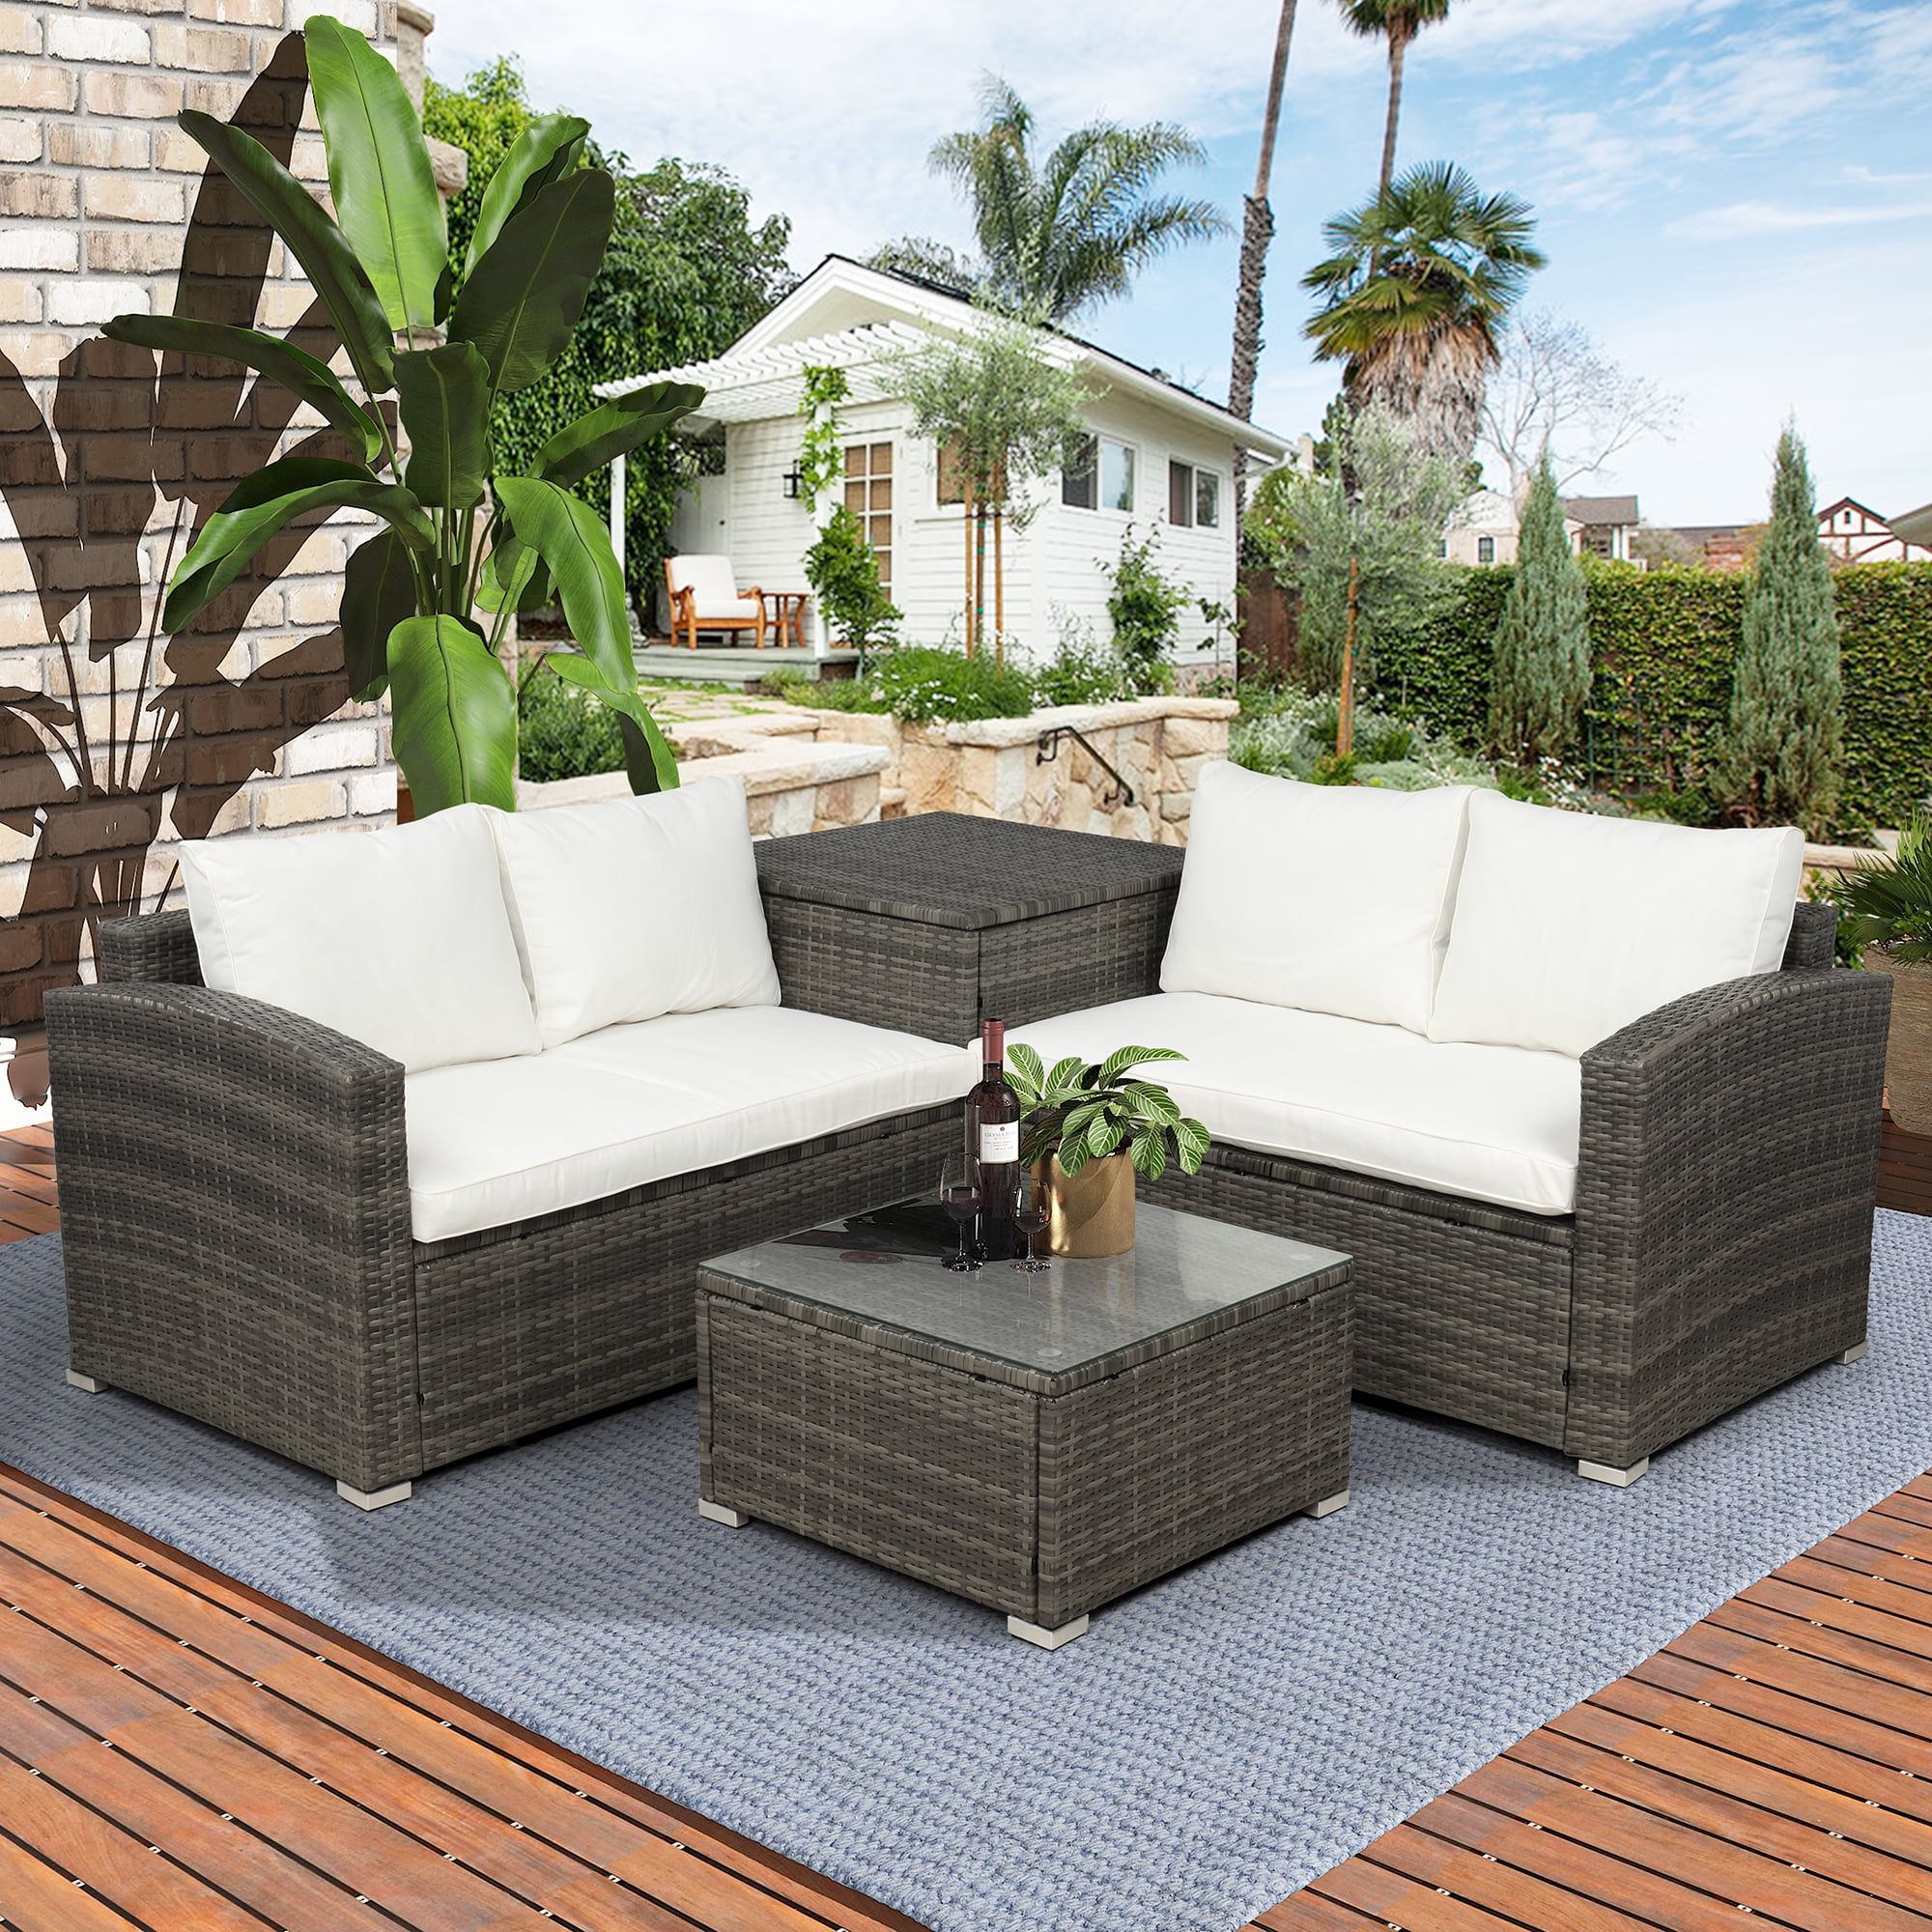 4 Piece Rattan Patio Furniture Sets, Wicker Bistro With Ottoman Coffee With 4pcs Rattan Patio Coffee Tables (View 6 of 20)